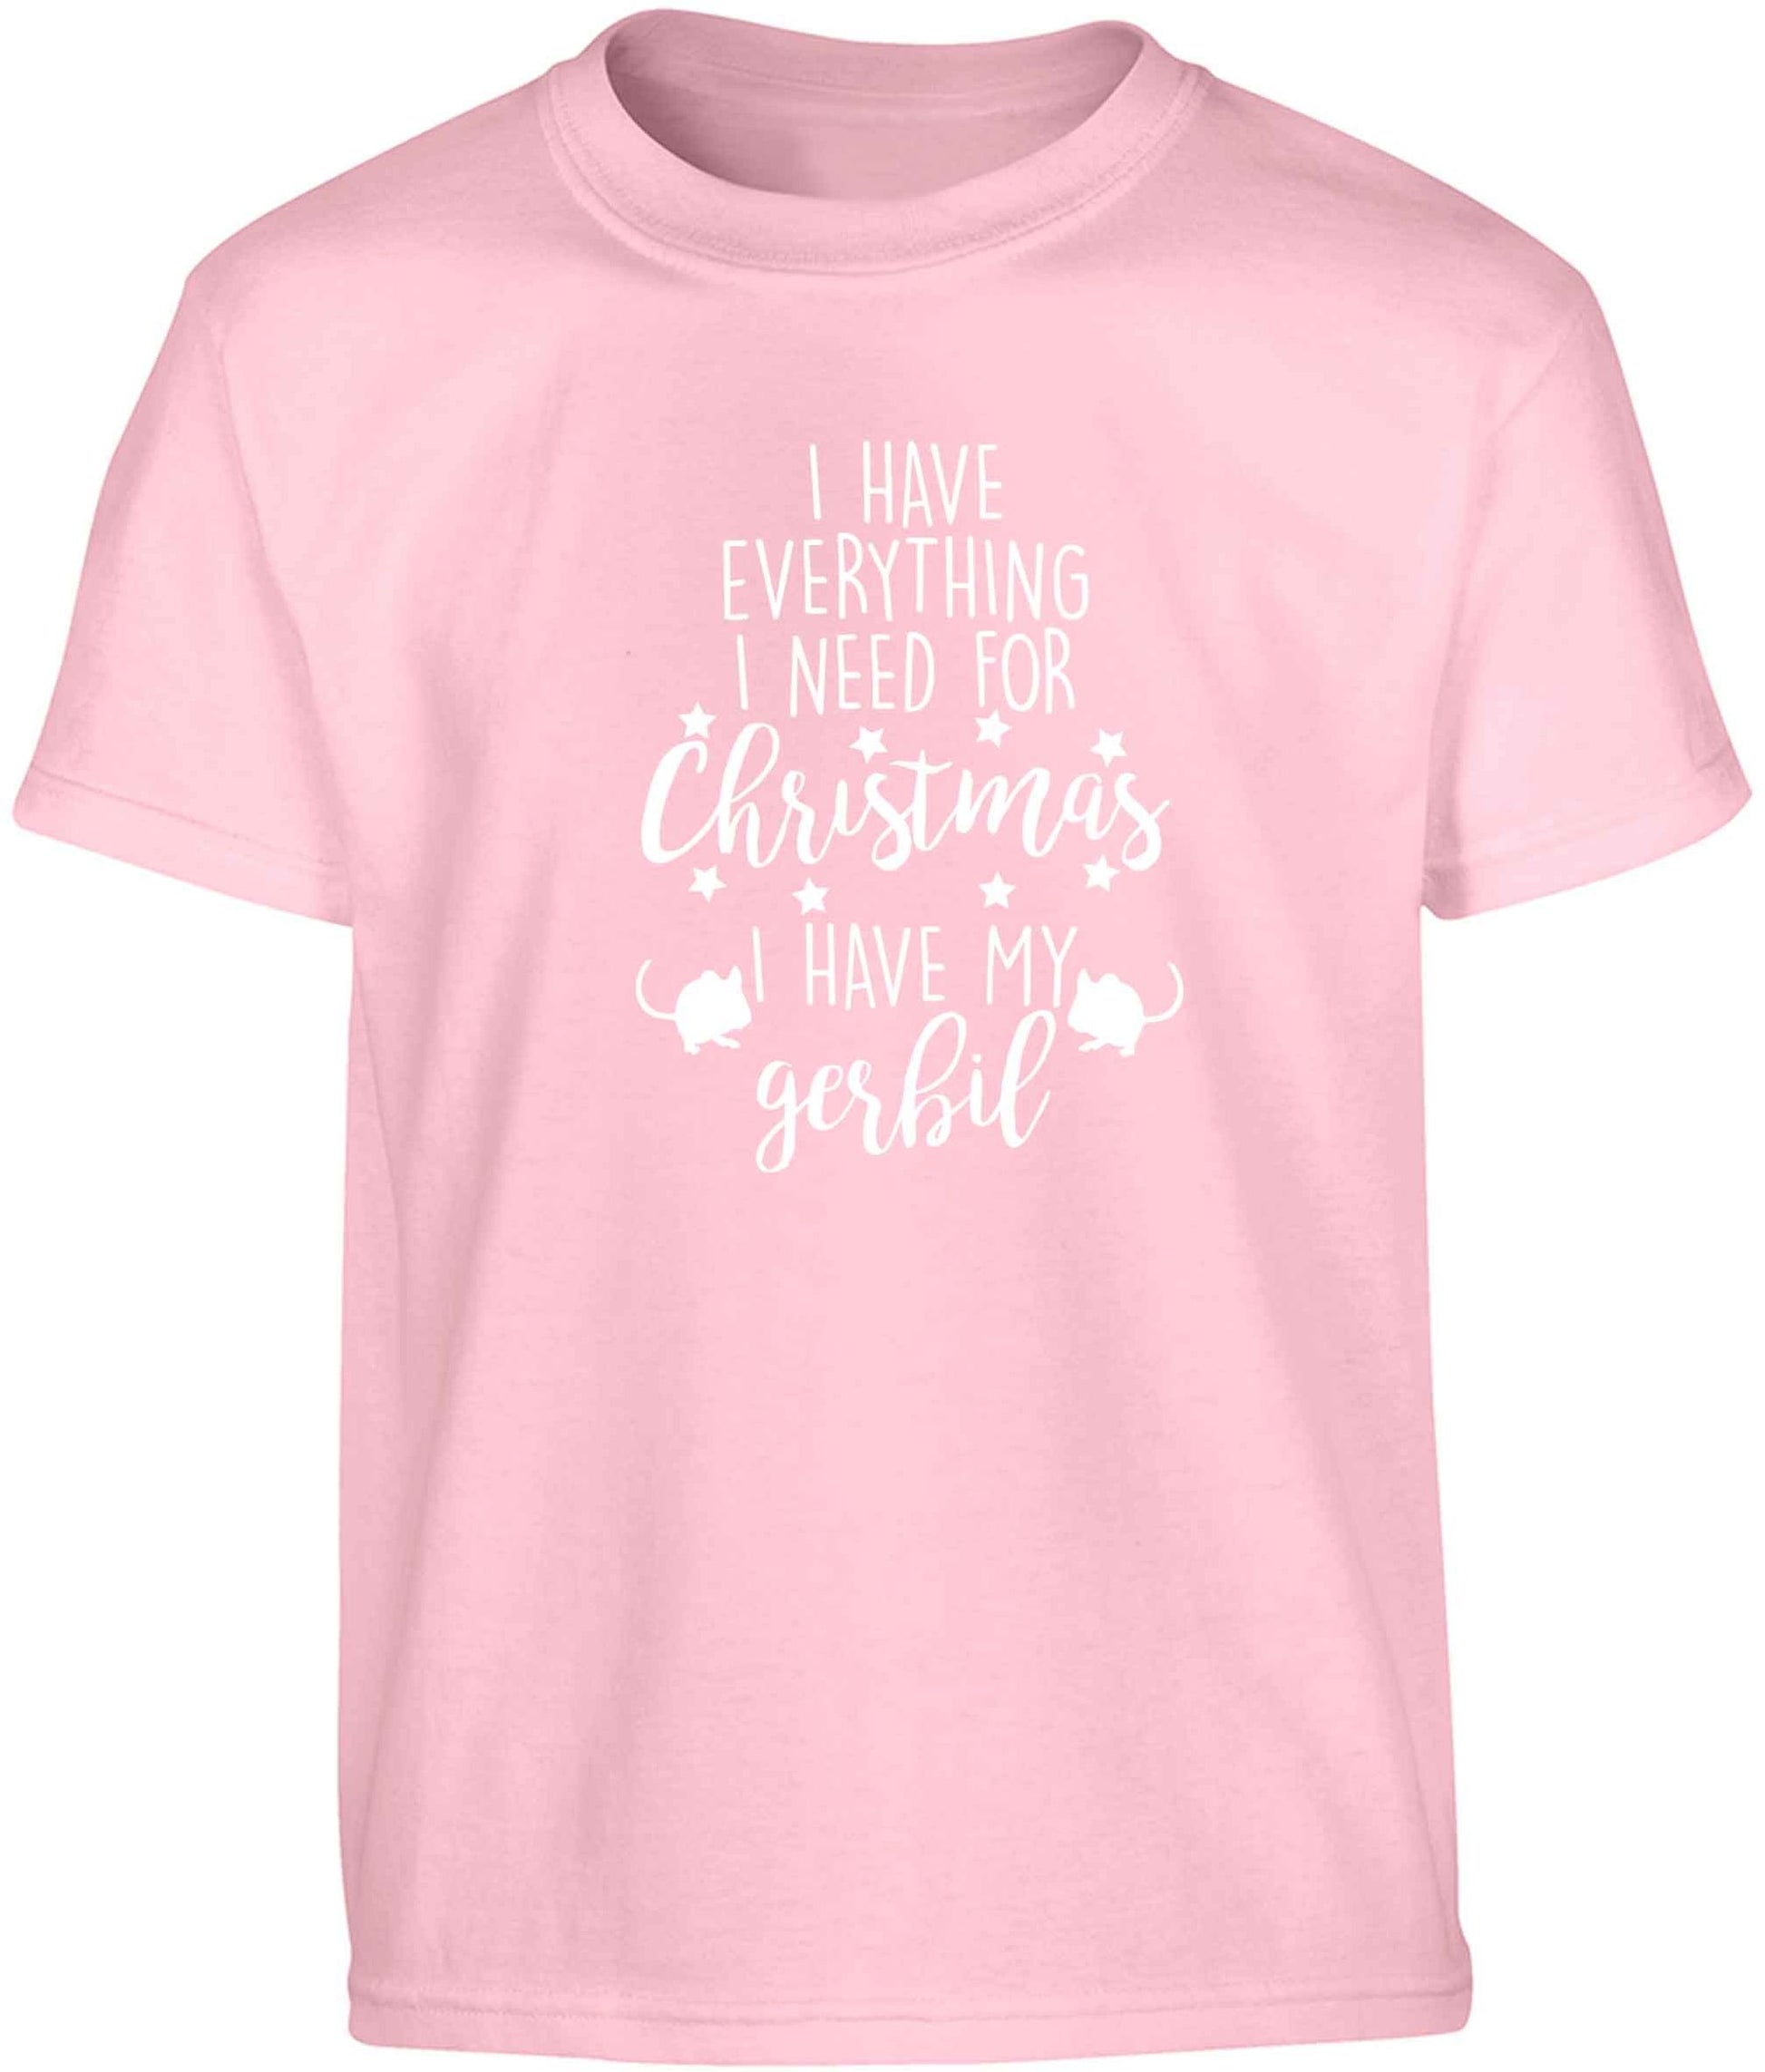 I have everything I need for Christmas I have my gerbil Children's light pink Tshirt 12-13 Years